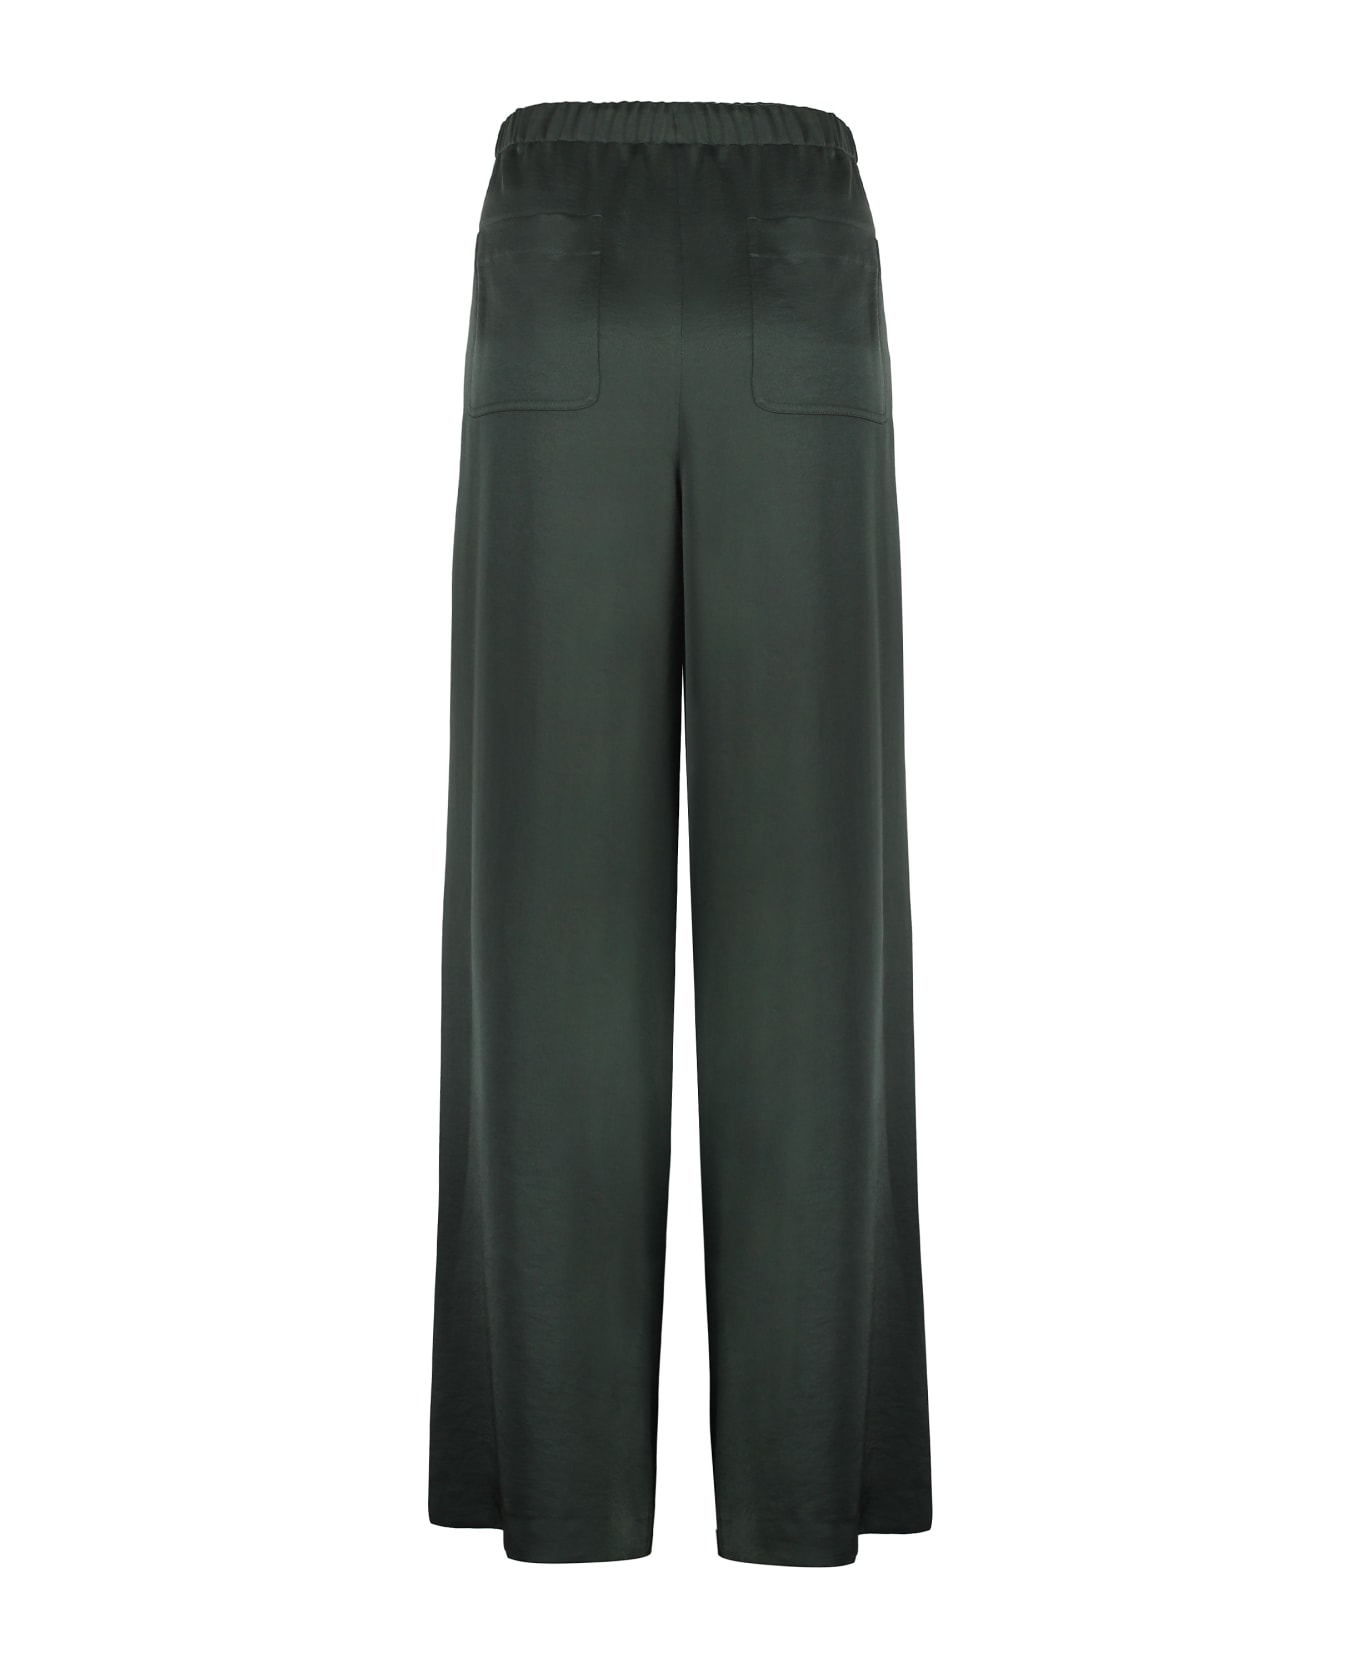 Vince Satin Trousers - green